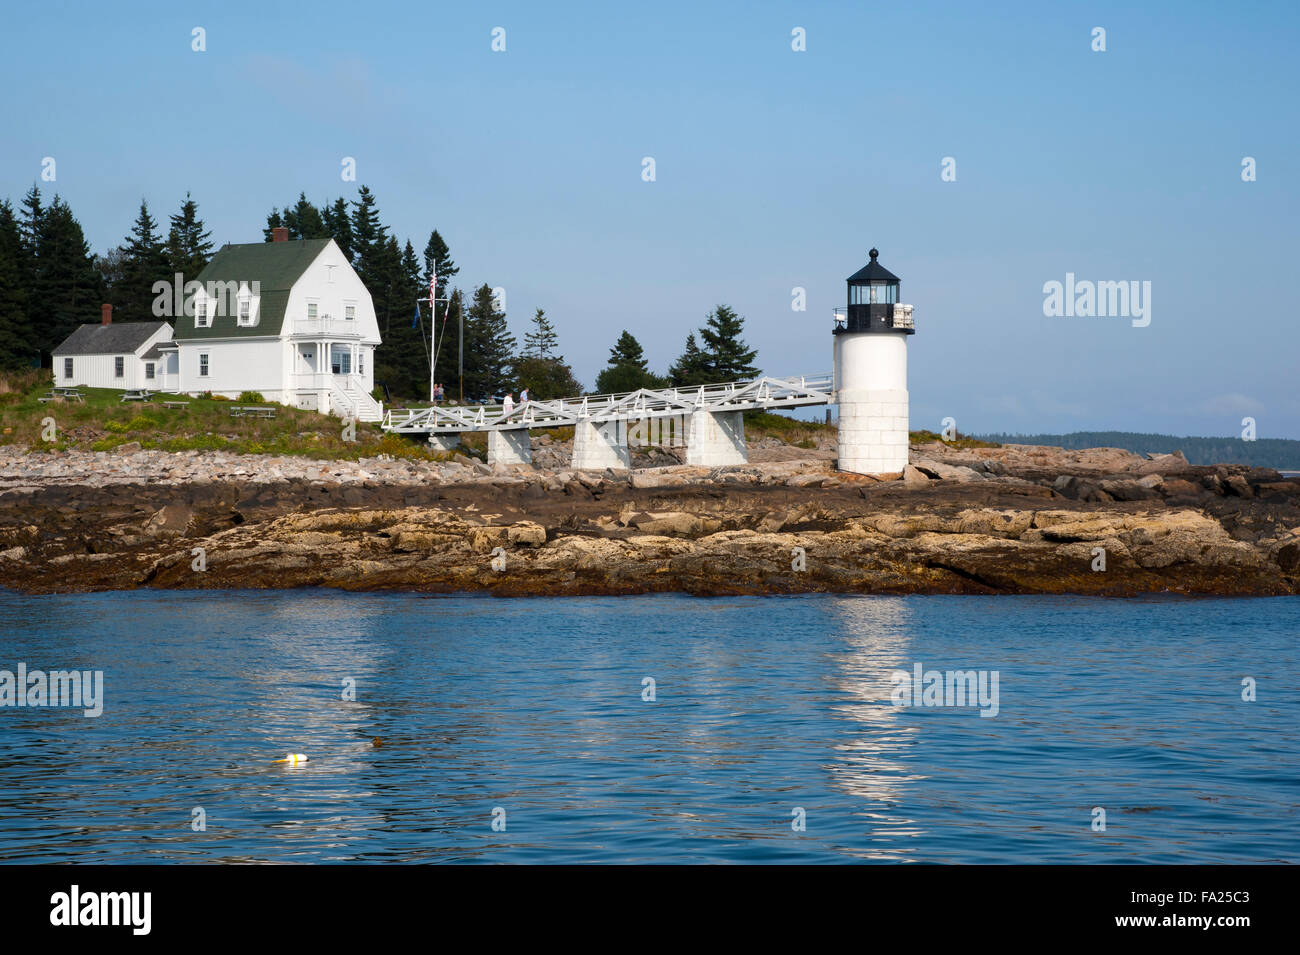 Water view leaving Port Clyde harbor passing by Marshall Point lighthouse in Maine on an early summer evening. Stock Photo